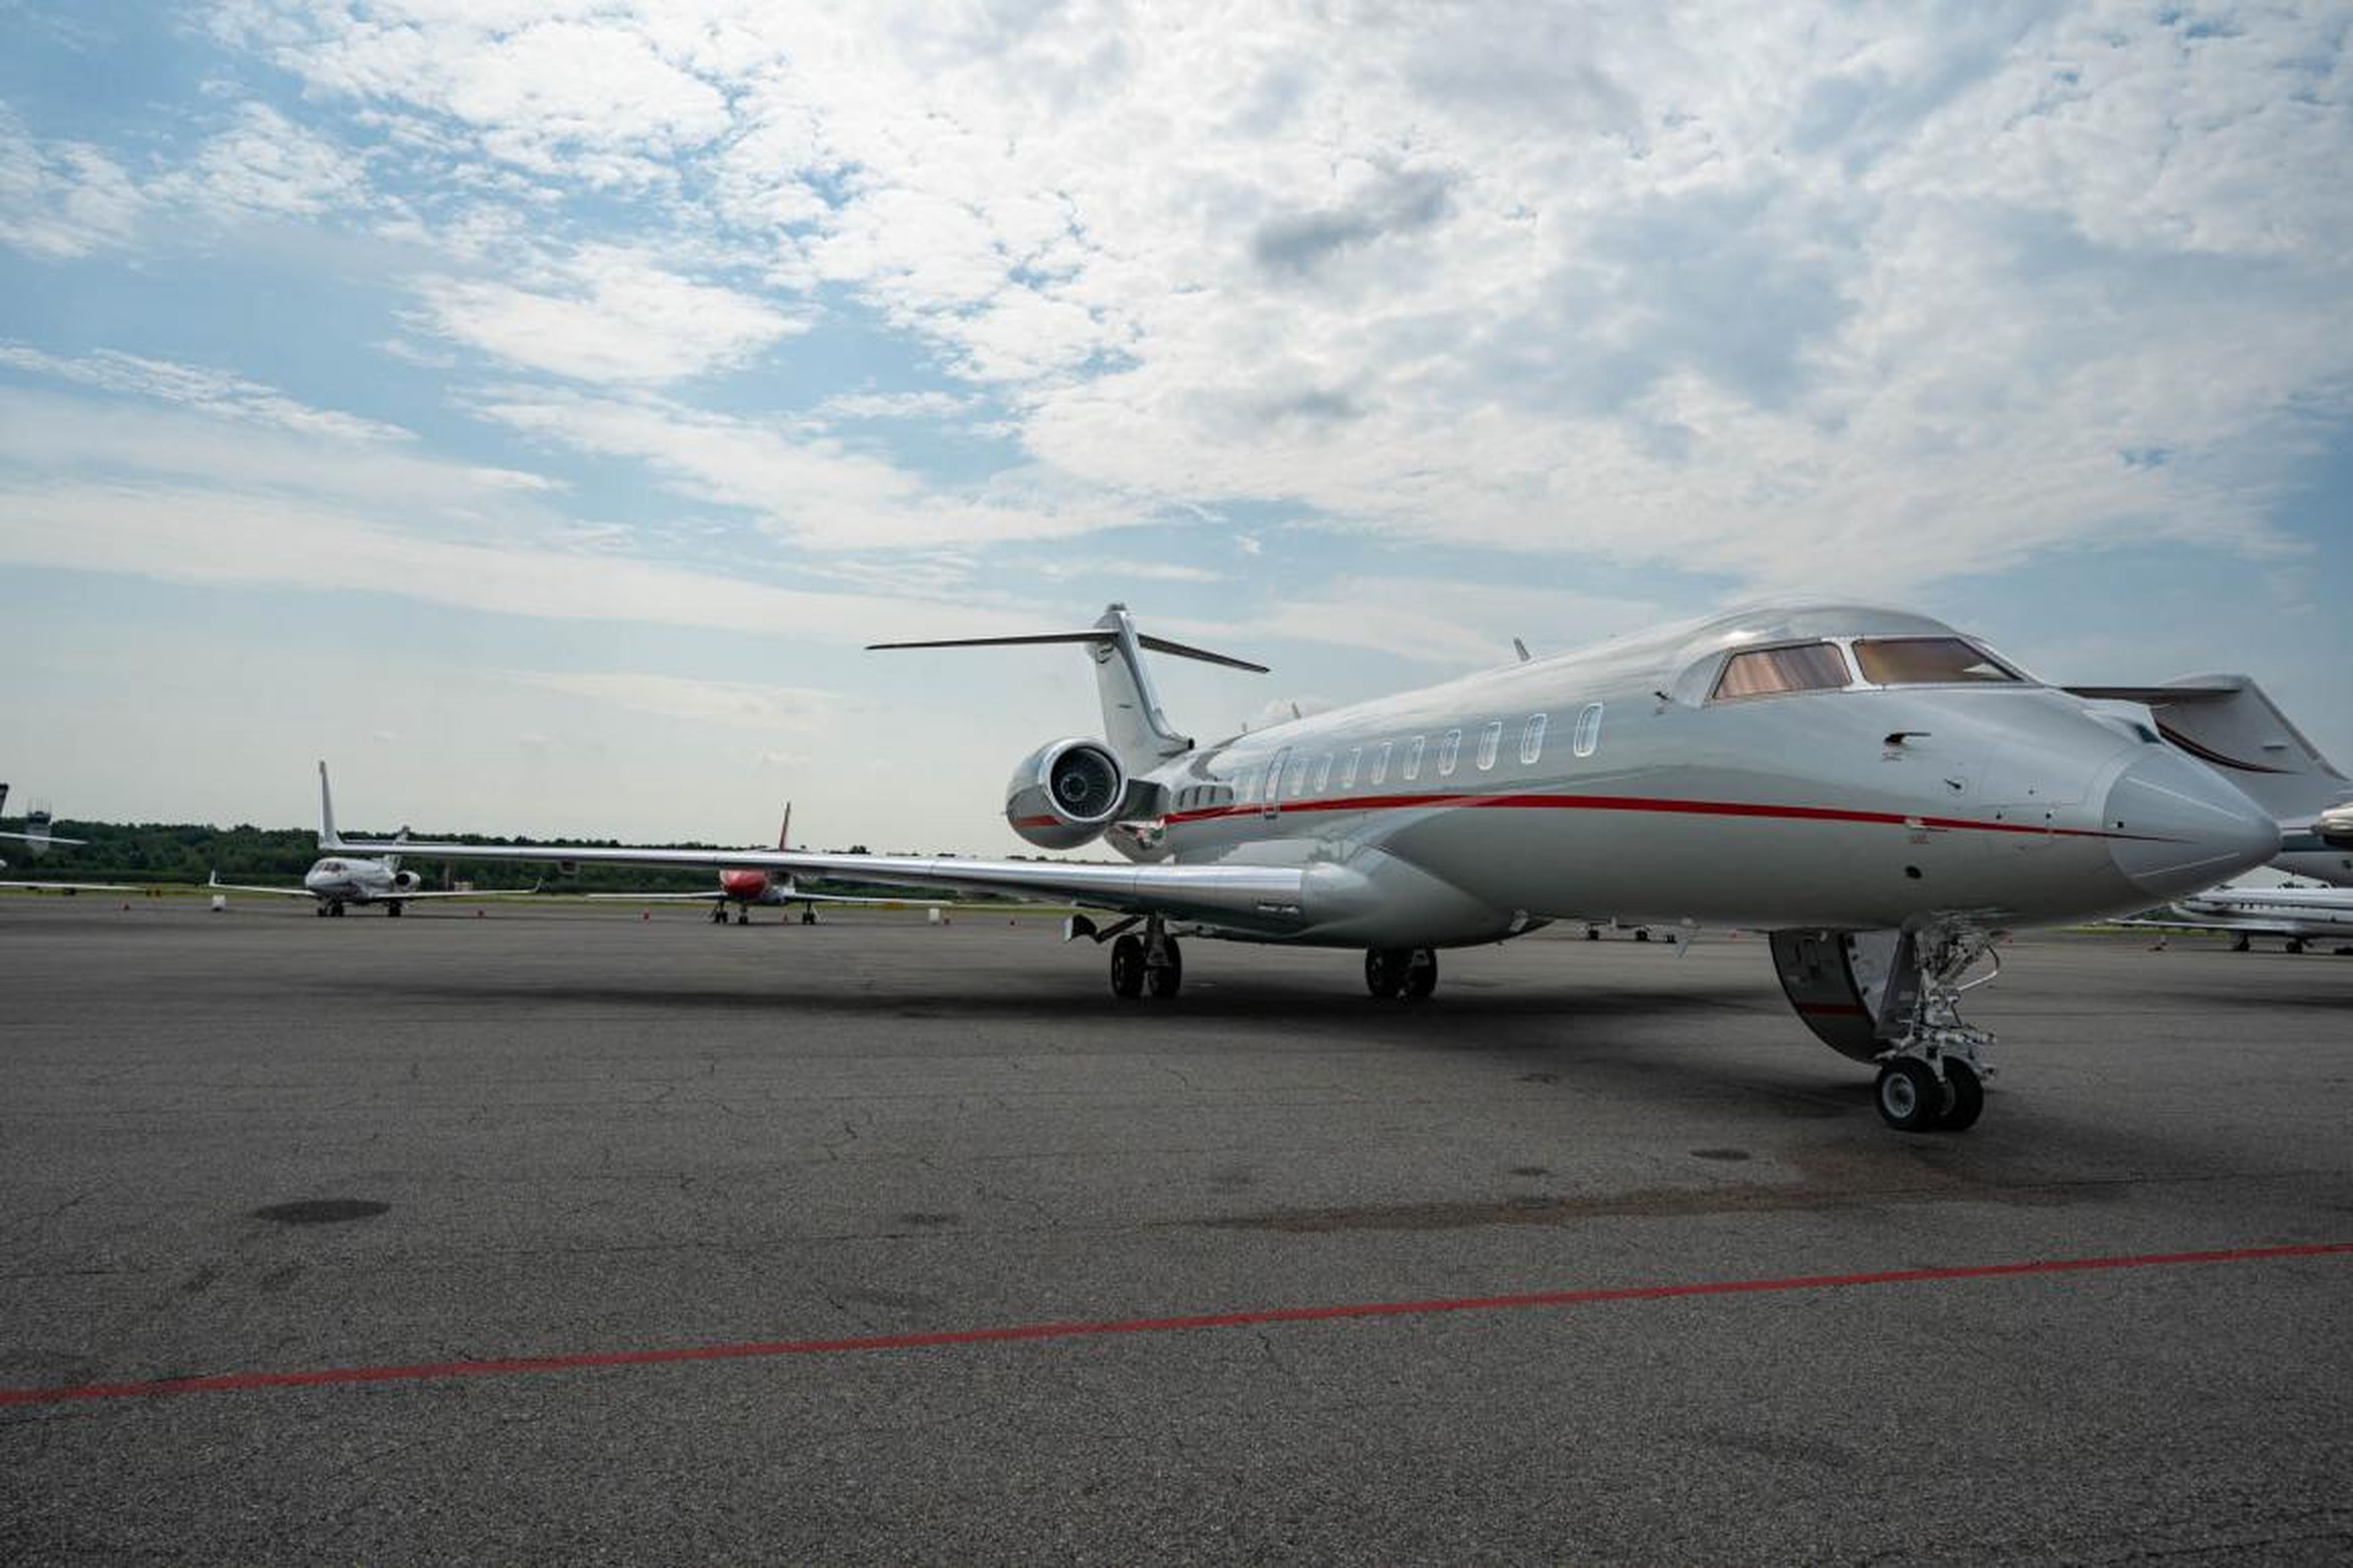 This particular Global 6000, registration 9H-VTD, belongs to VistaJet, a global private air charter company.